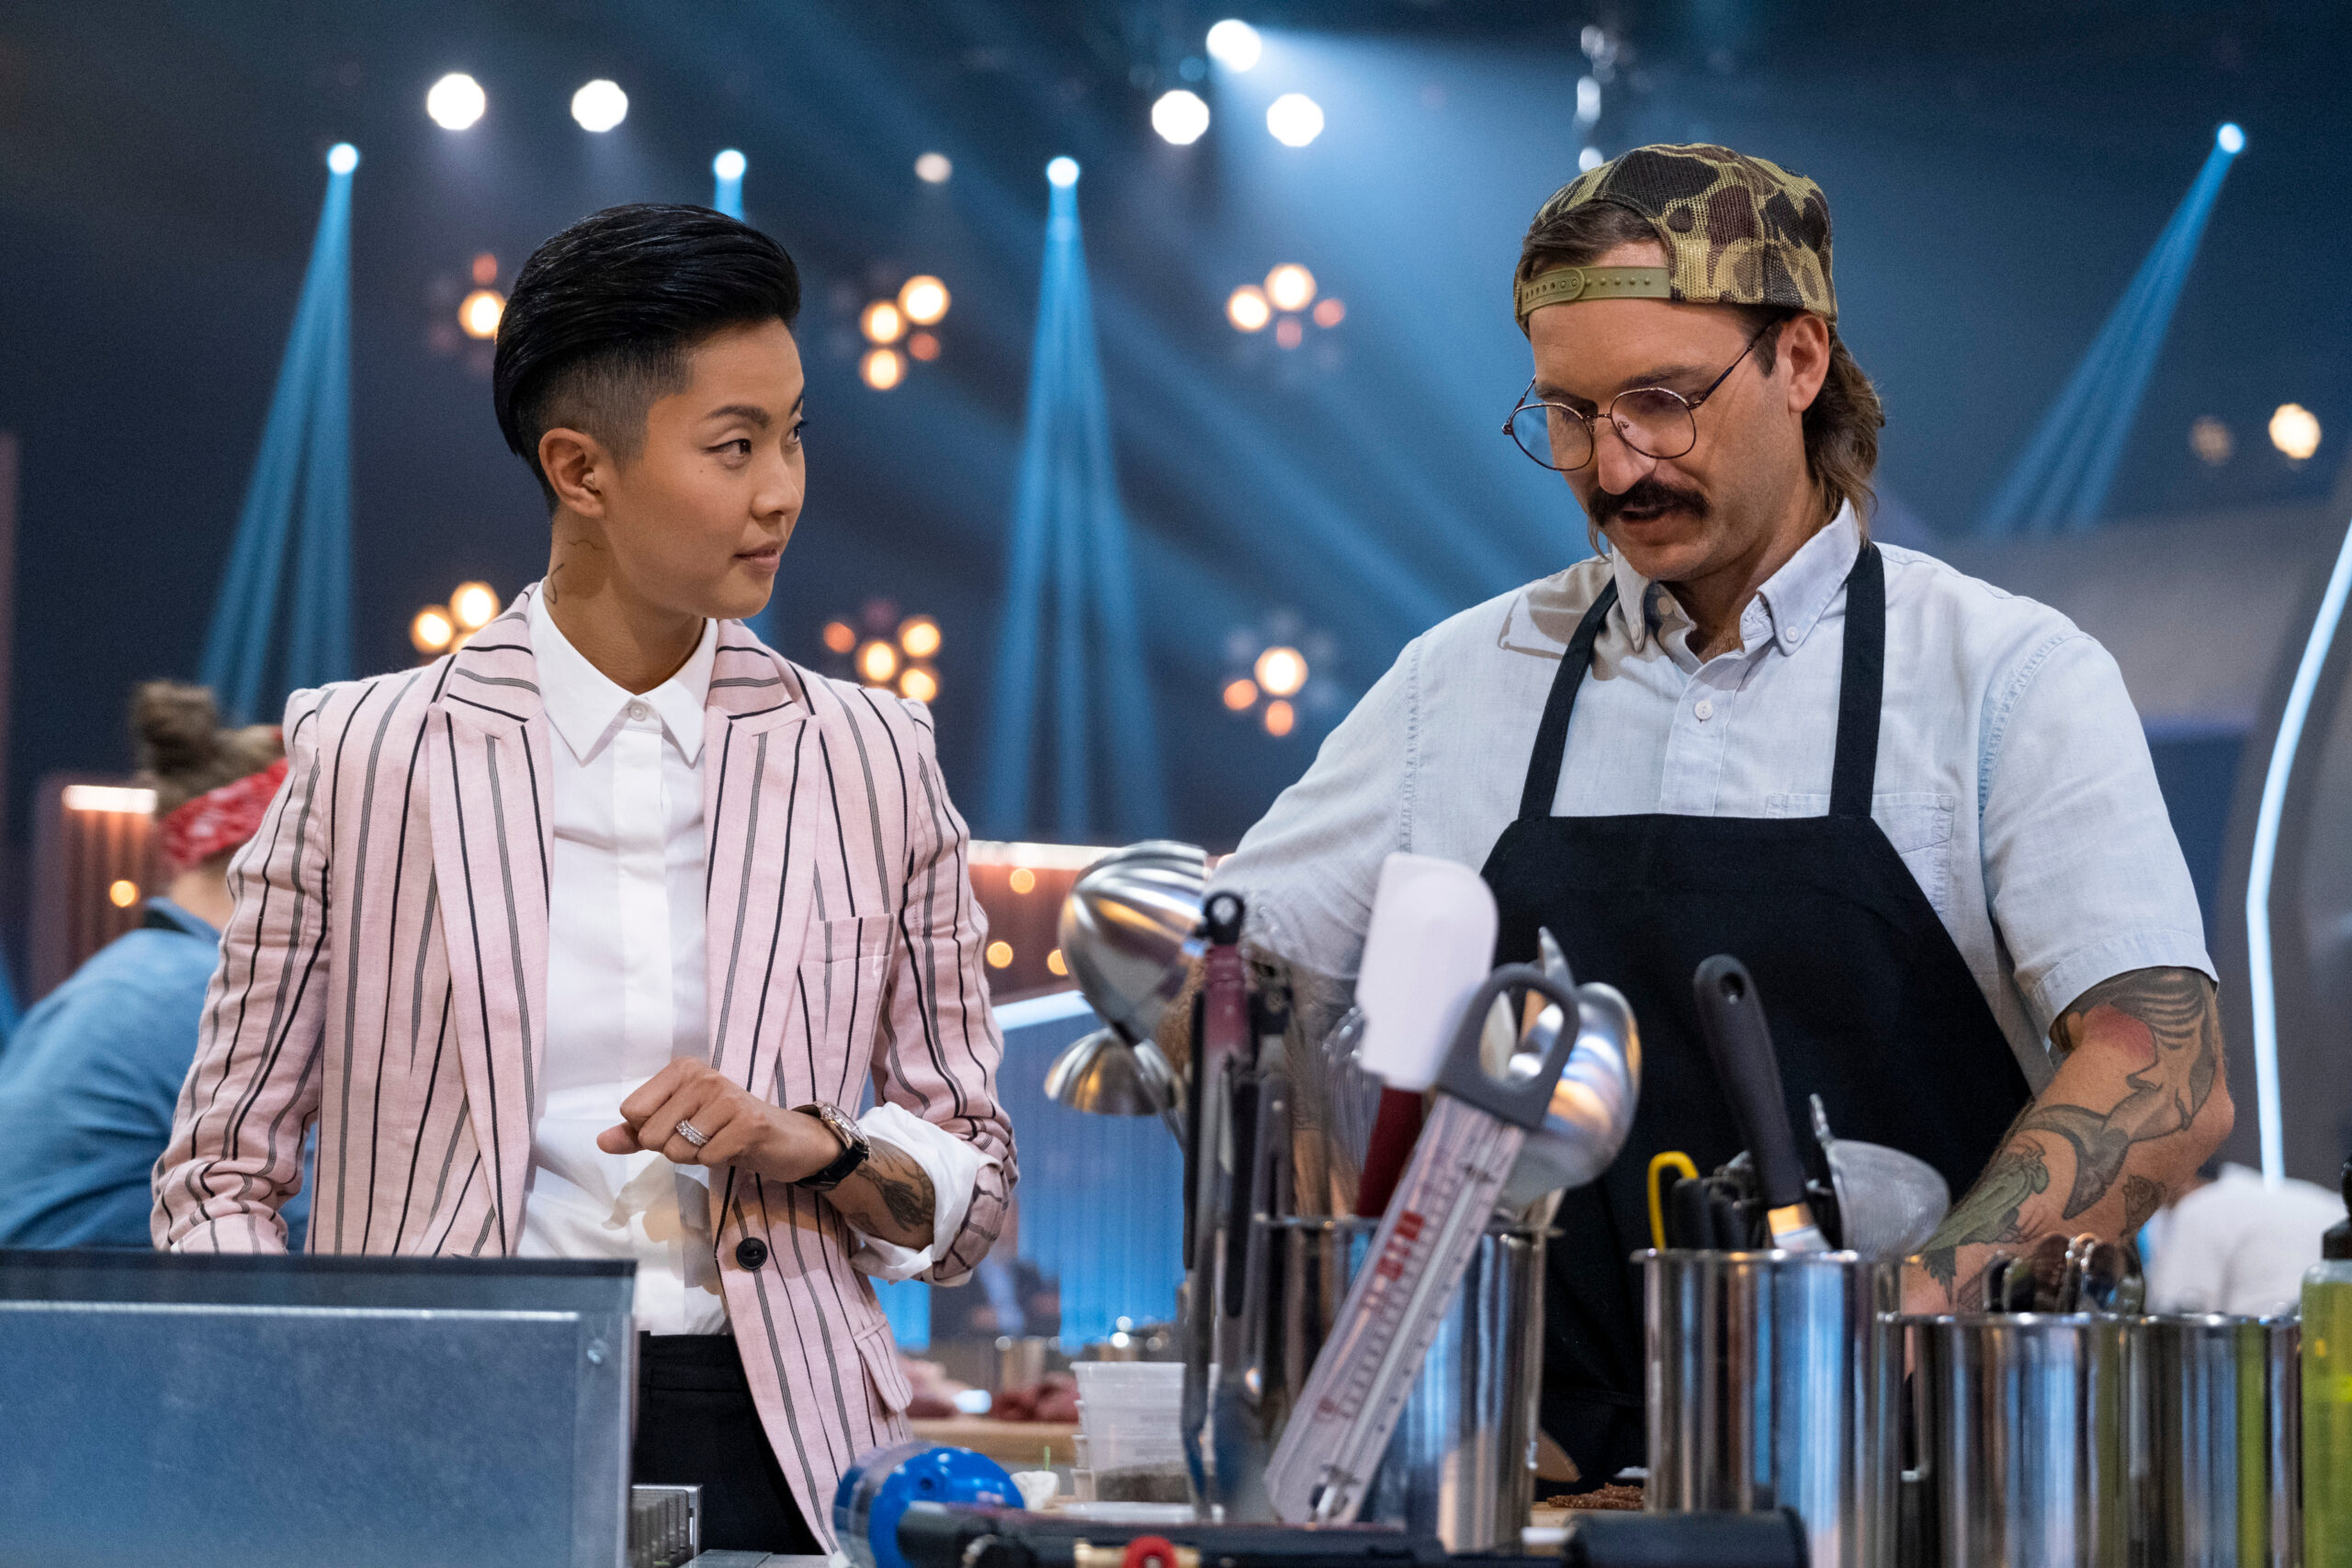 Co-host Kristen Kish and Challenger chef Mason Hereford on Iron Chef: Quest for an Iron Legend. (Photo Credit: Adam Rose/Netflix © 2022)